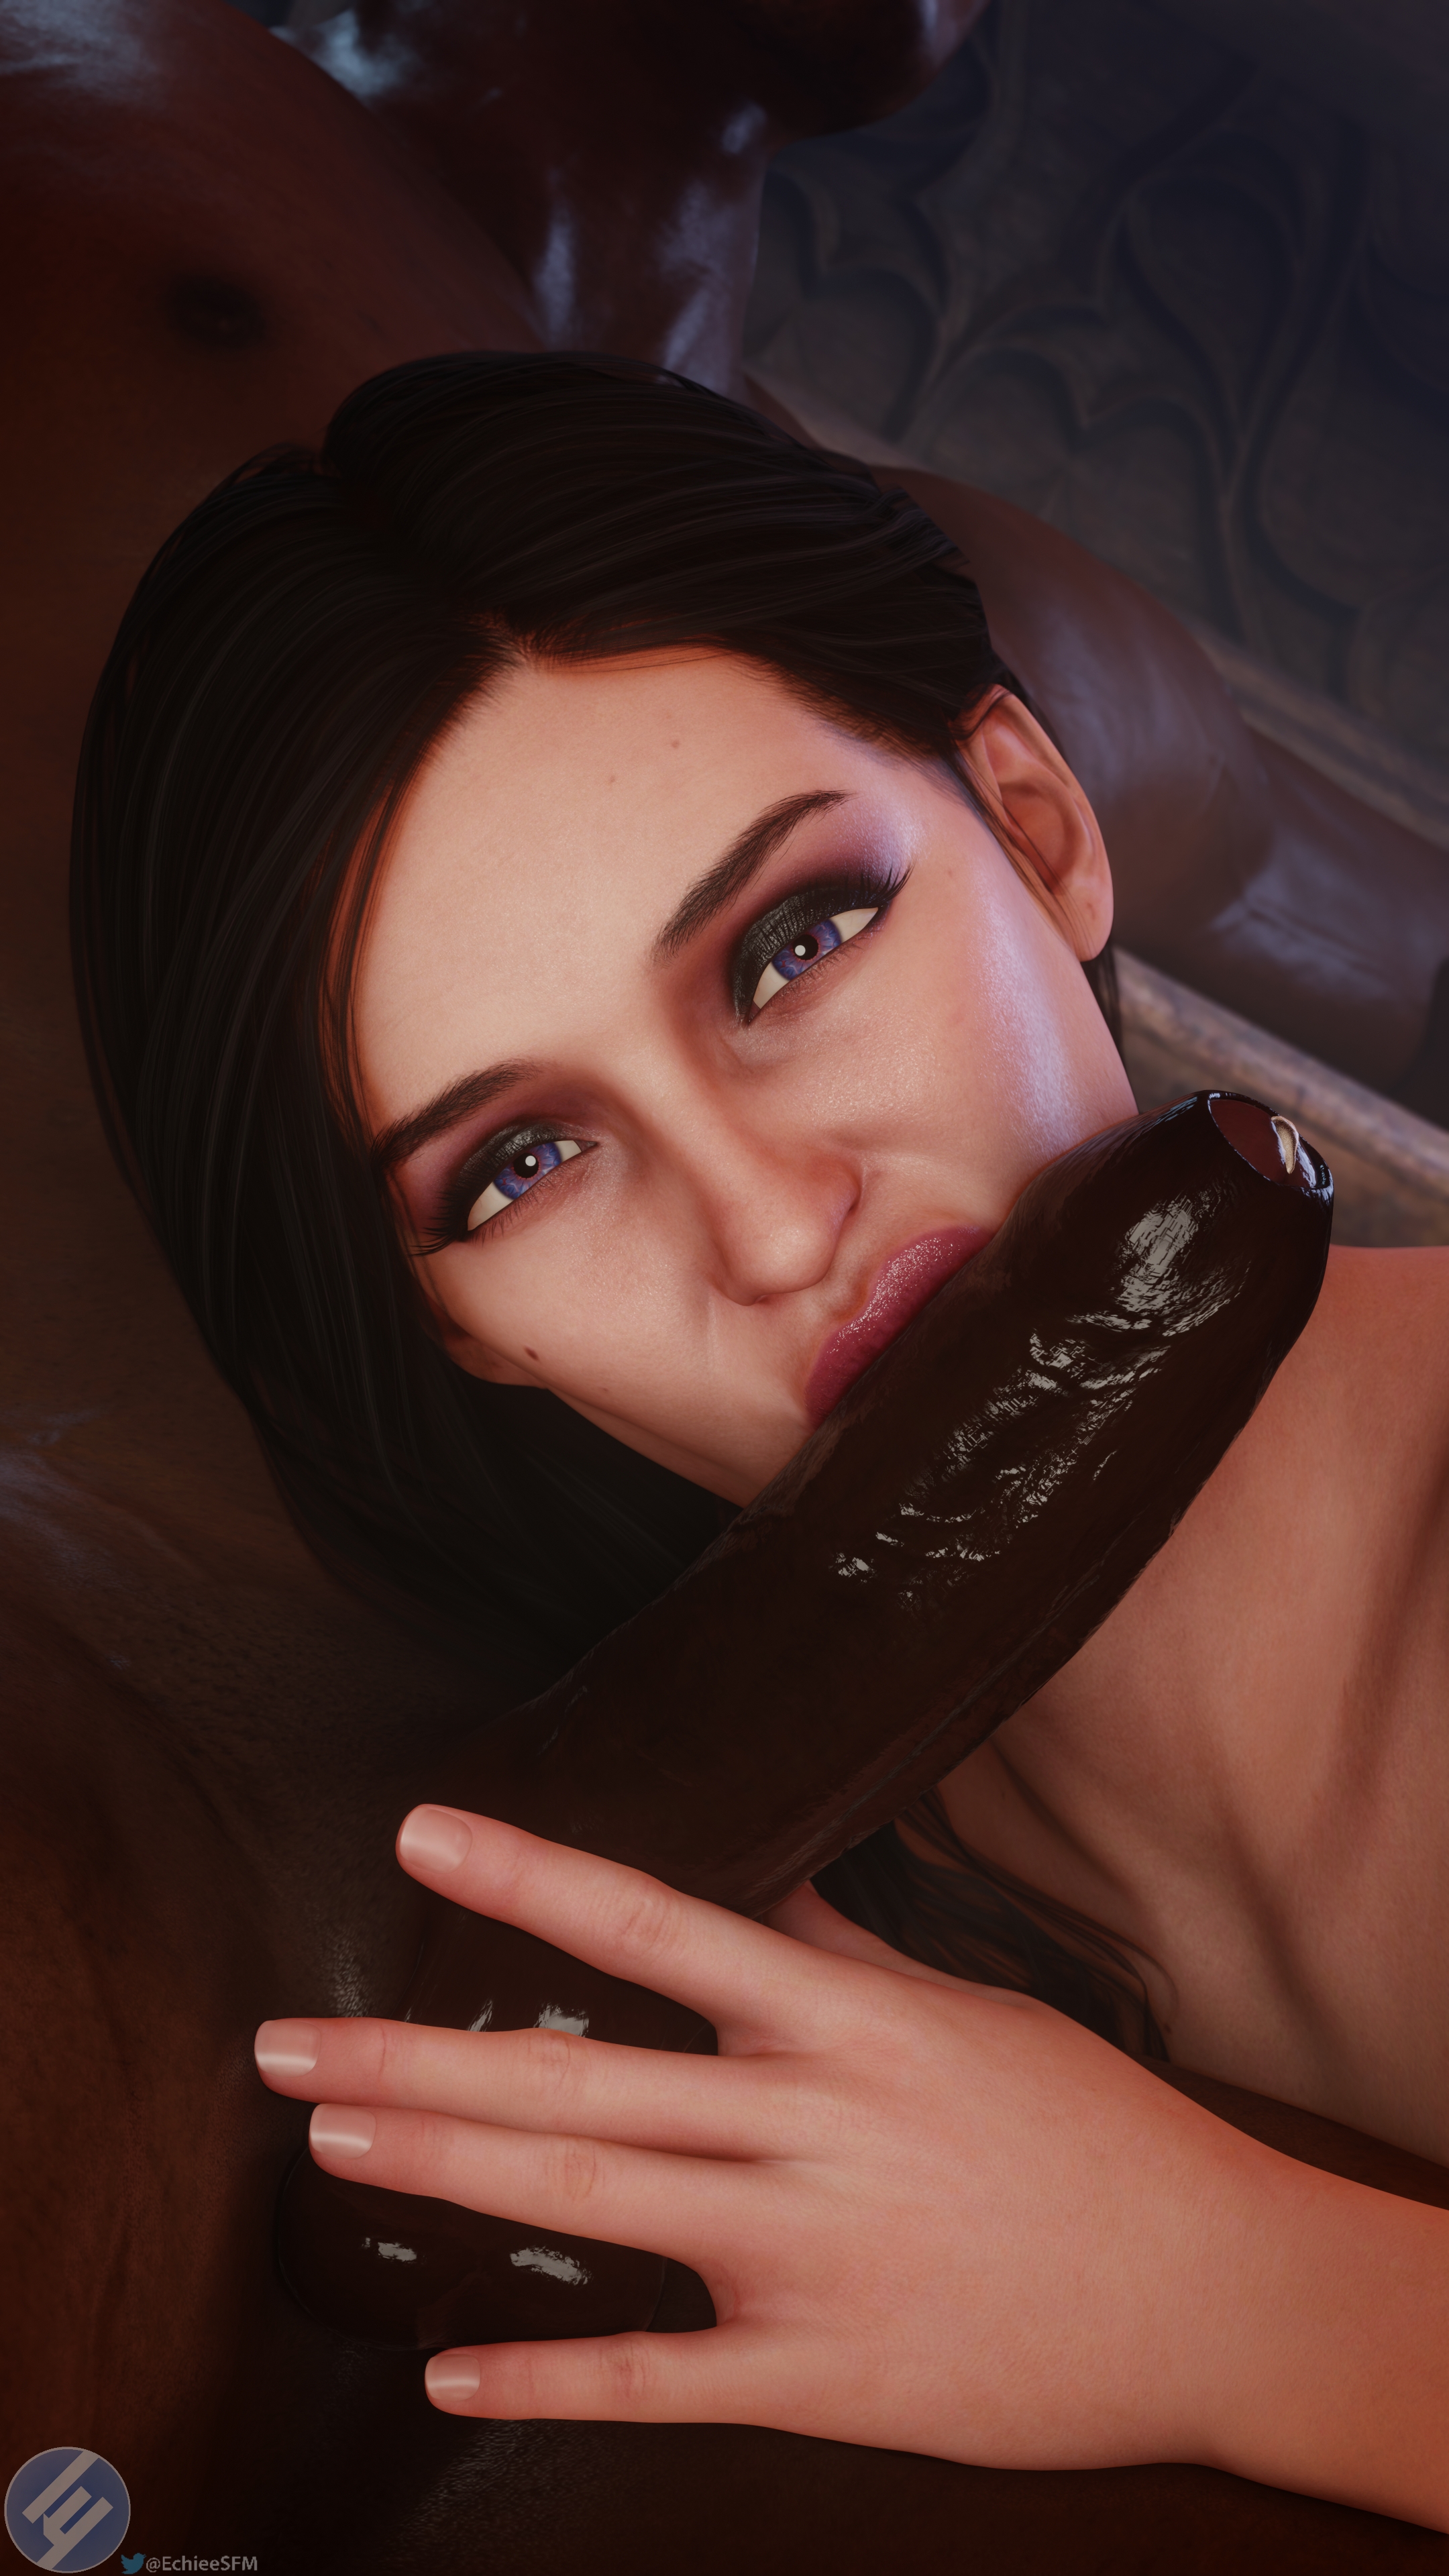 Lipsing the shaft Yennefer di Vengerberg The Witcher 3 The Witcher Lips Kissing Cock Tease Eye Contact 2